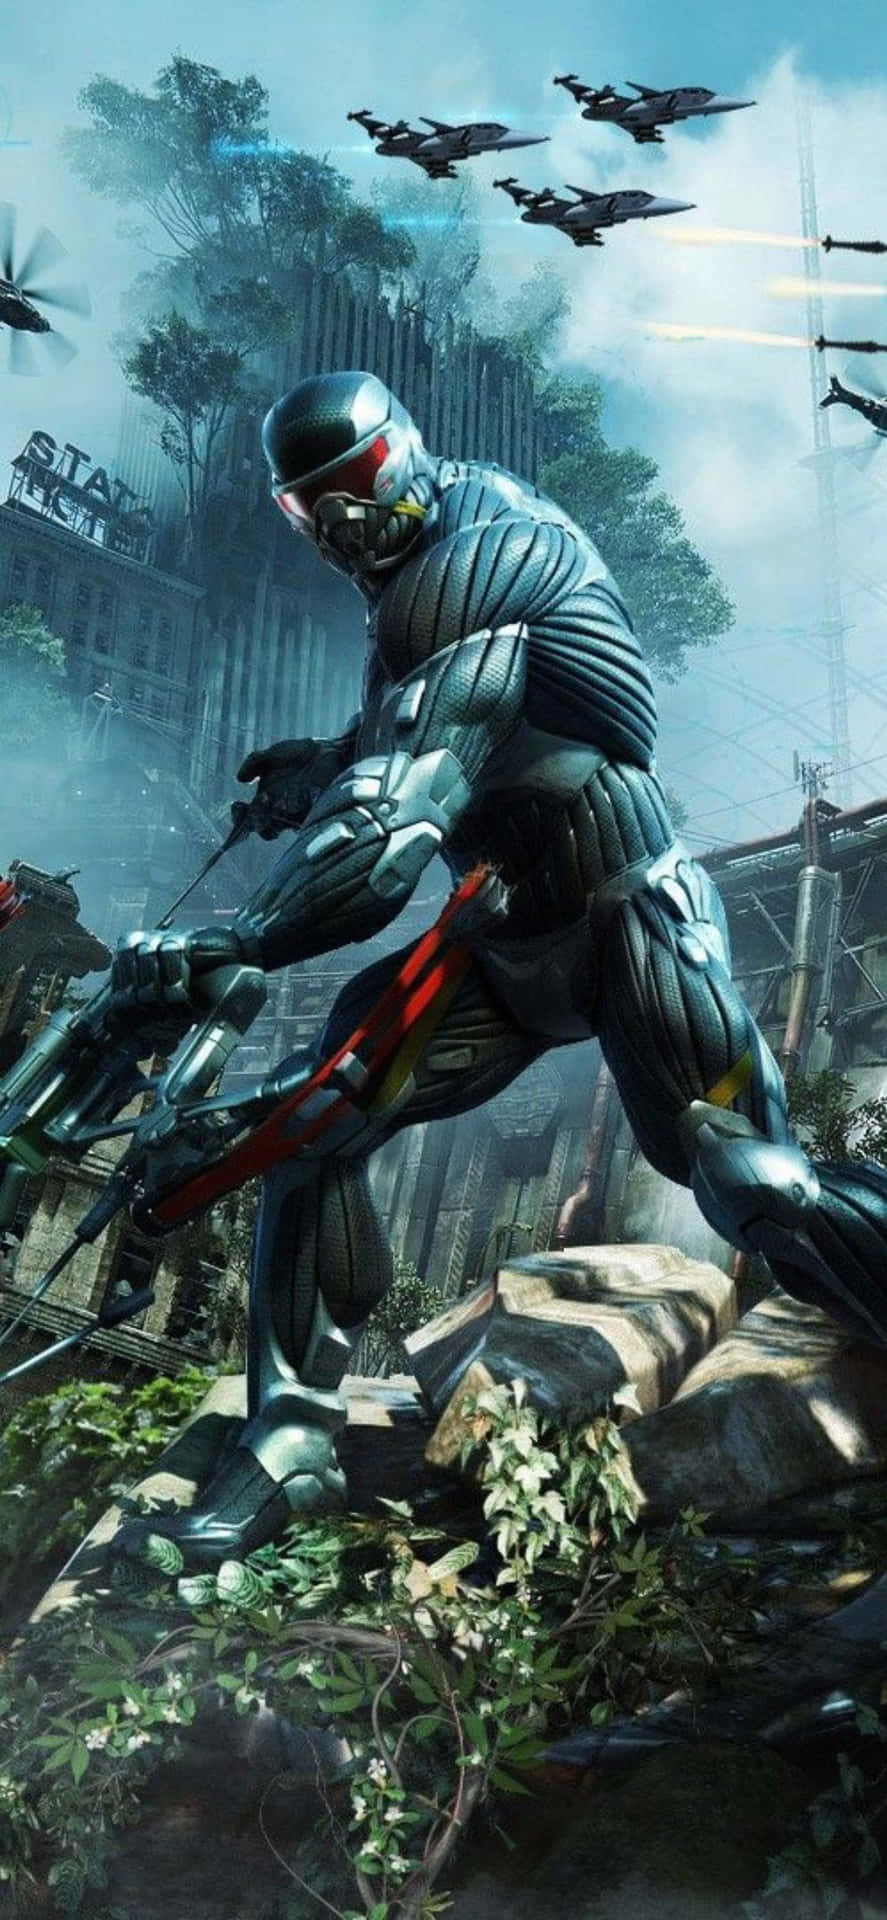 Play Crysis 3 on the Latest iPhone X